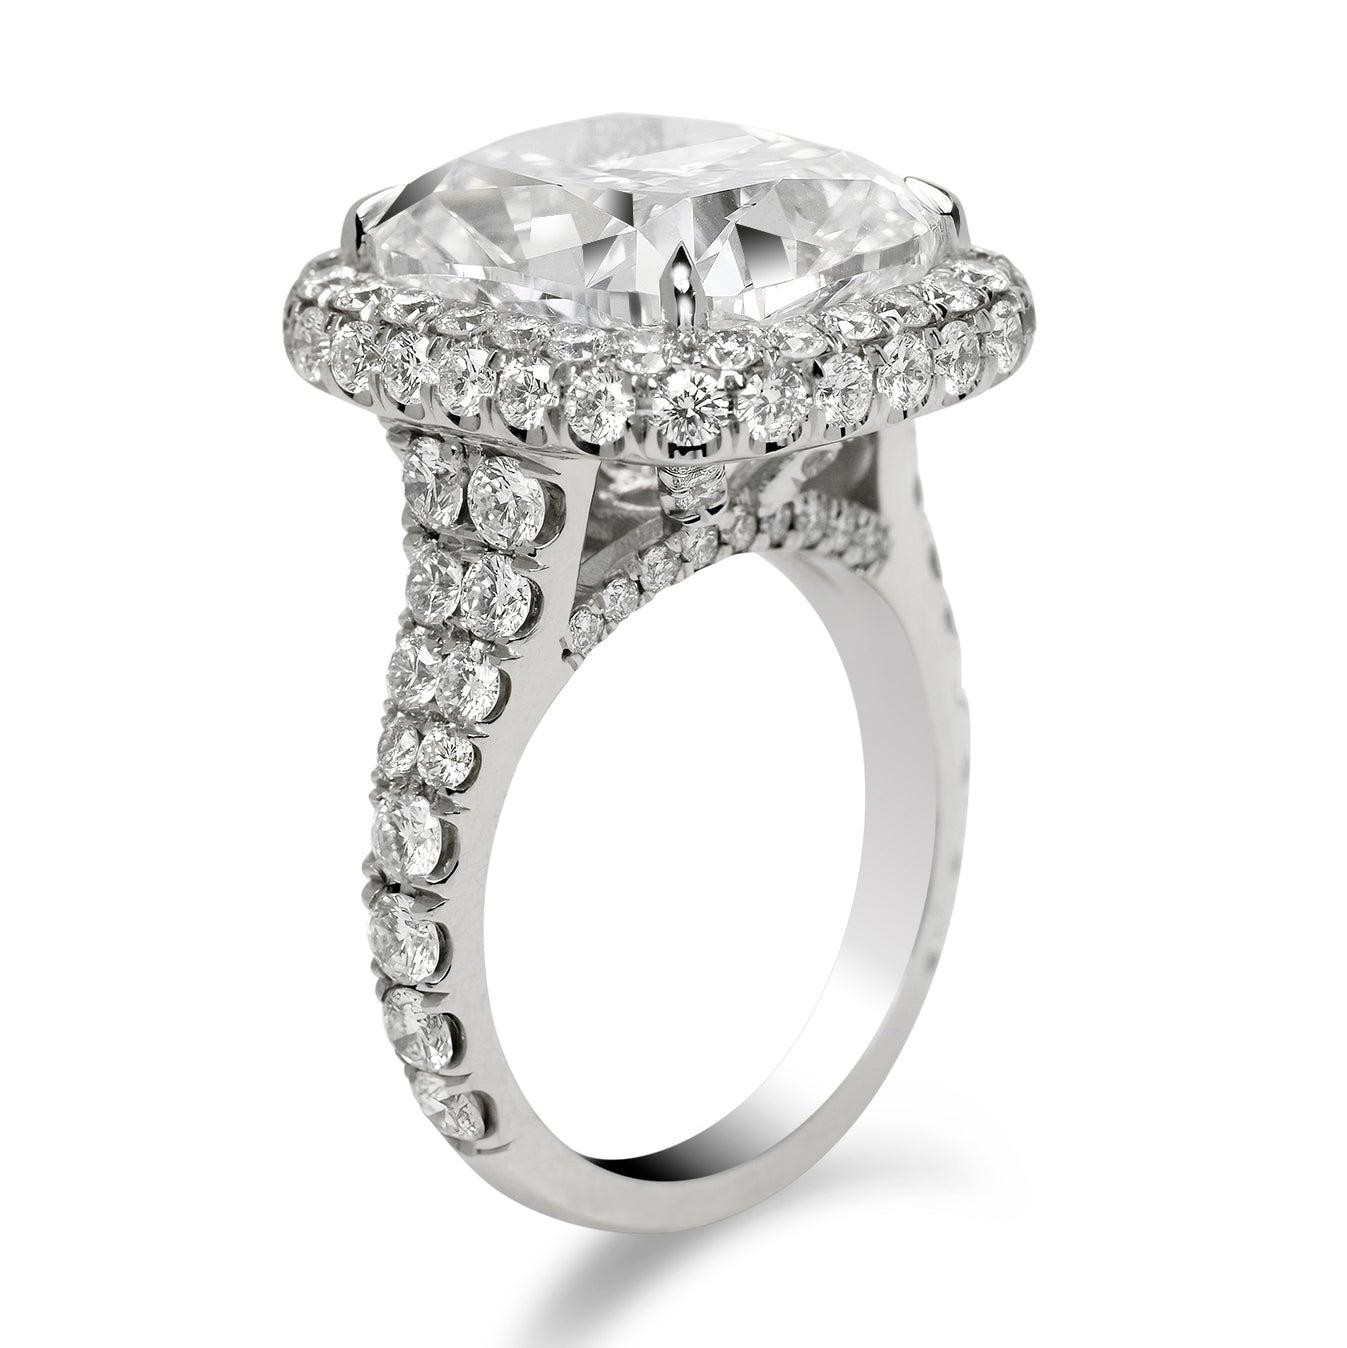 14 Carat Cushion Cut Diamond Engagement Ring GIA Certified E VVS2 In New Condition For Sale In New York, NY